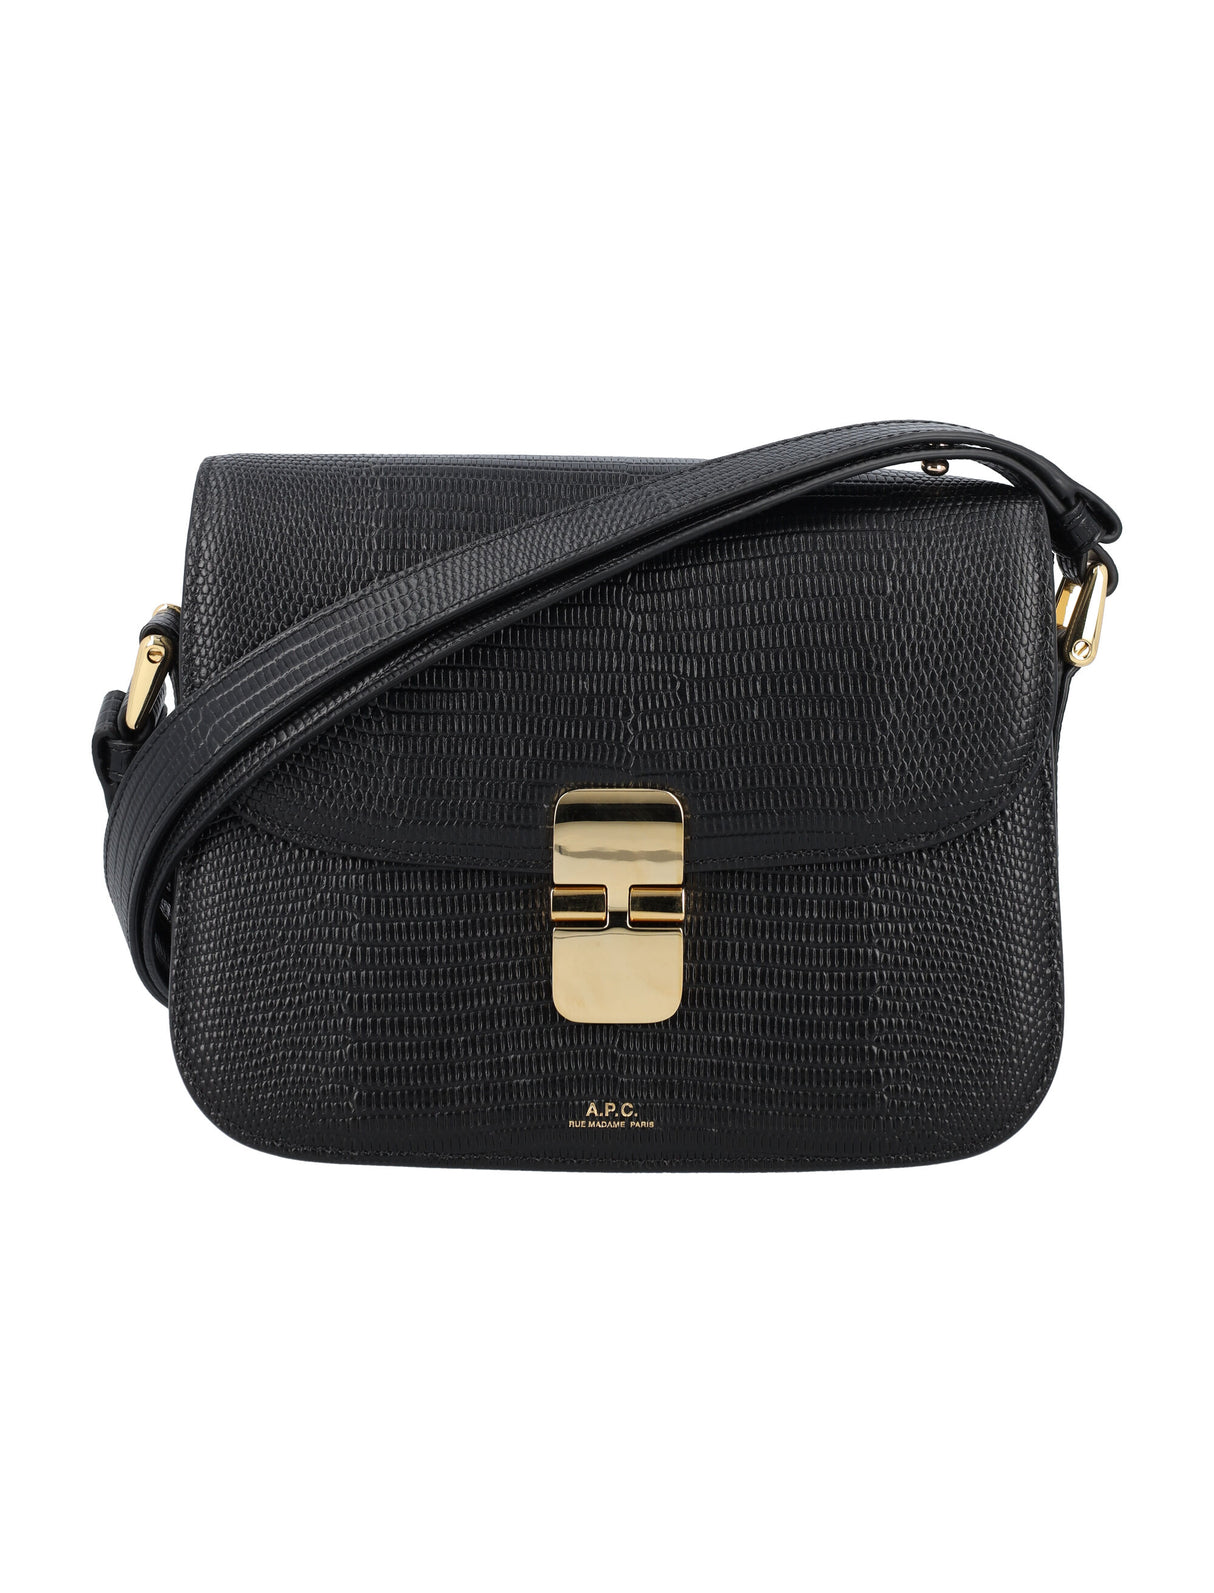 A.P.C. Grace Small Black Leather Handbag with Lizard Motif and Goldtone Accents